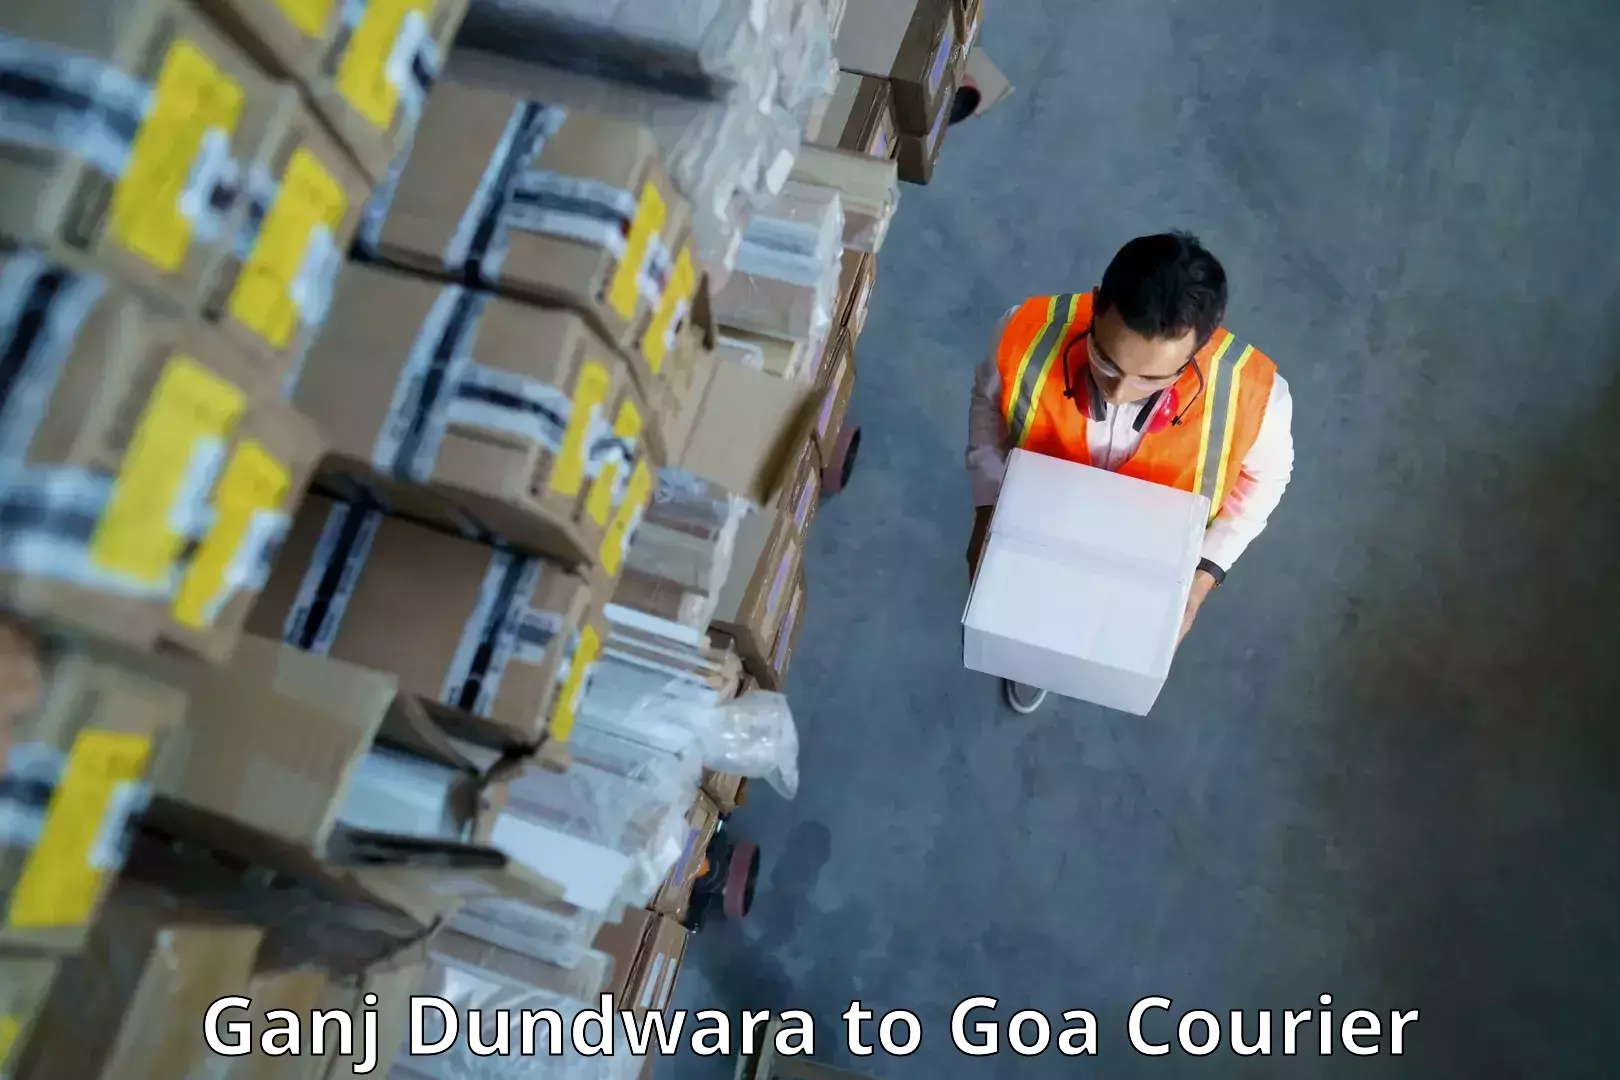 Reliable courier service Ganj Dundwara to Margao